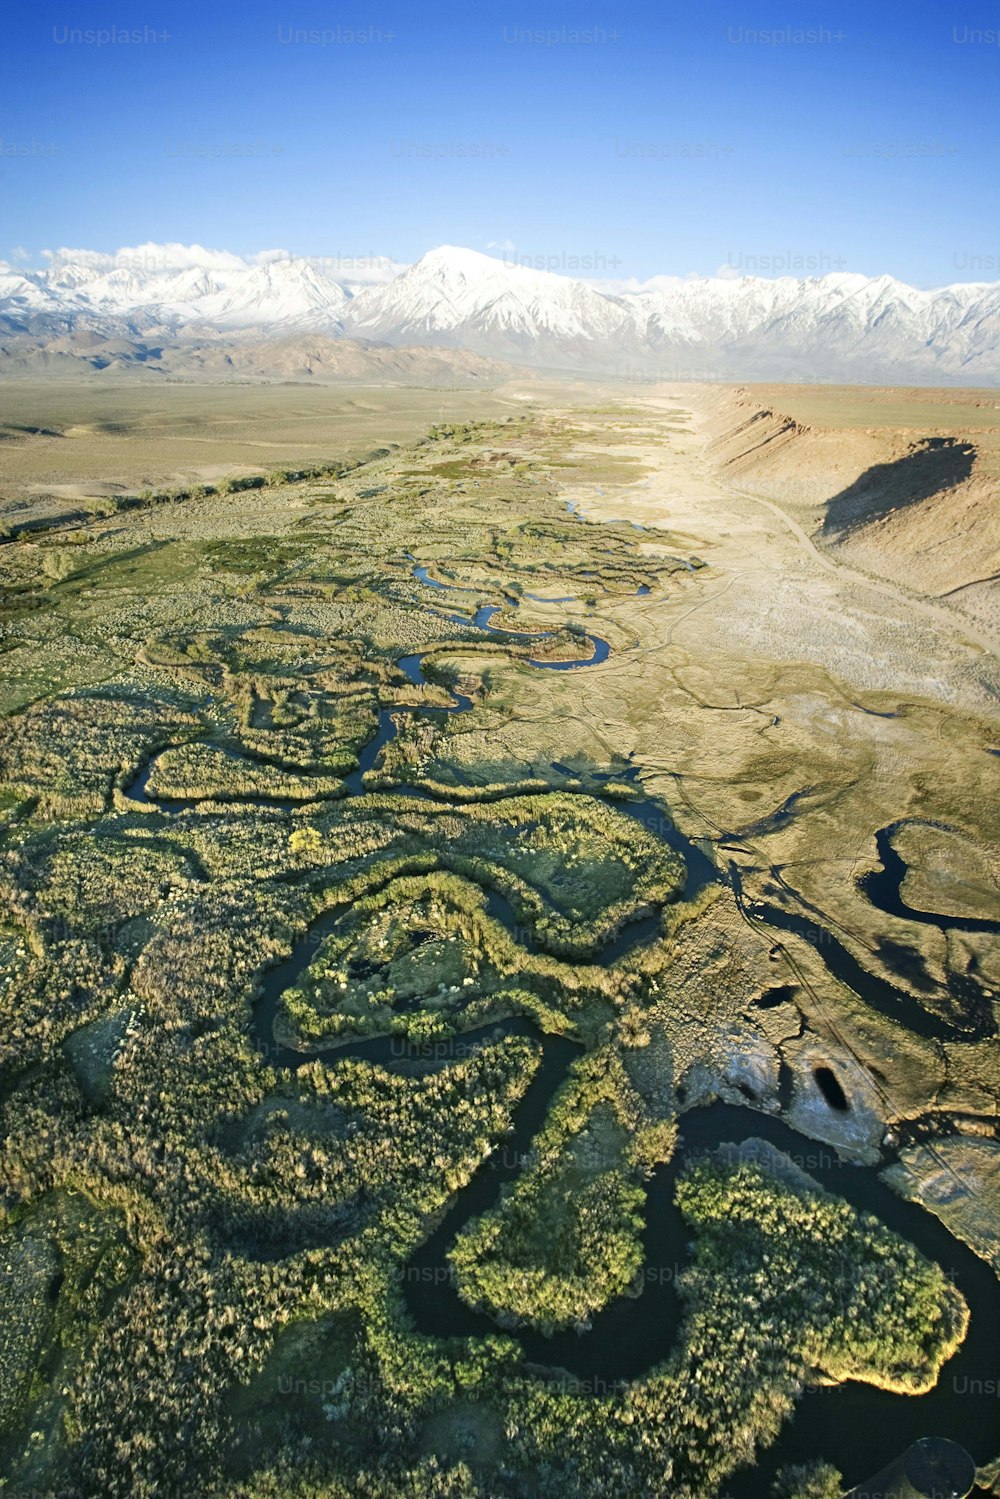 an aerial view of a landscape with mountains in the background